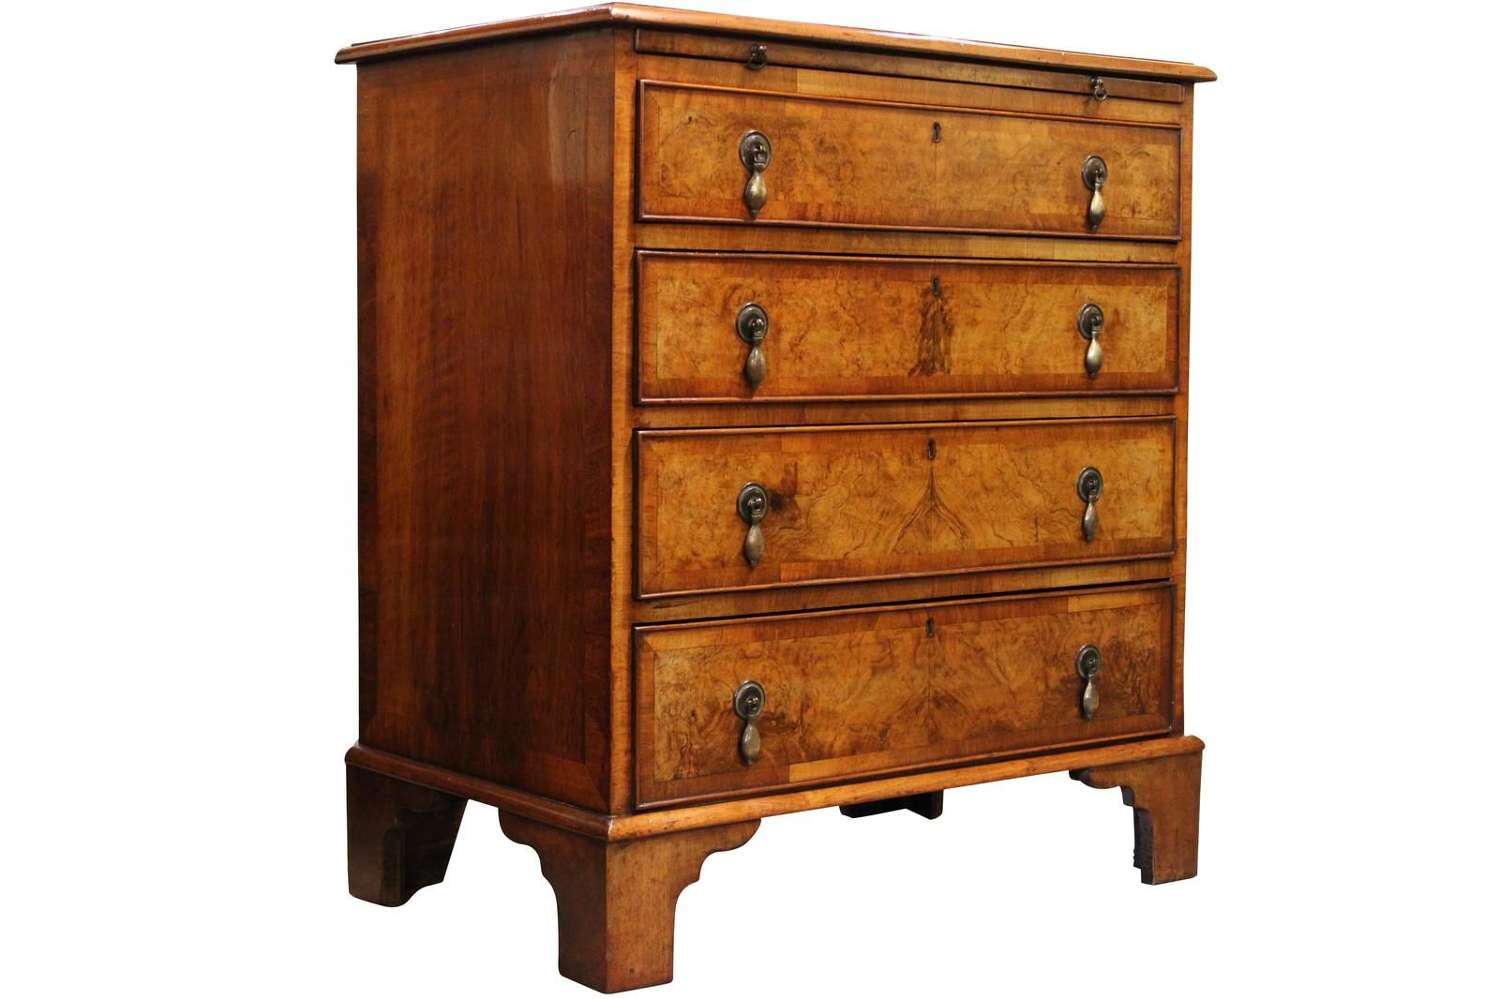 Small George II Style Burr Walnut Chest of Drawers c.1900